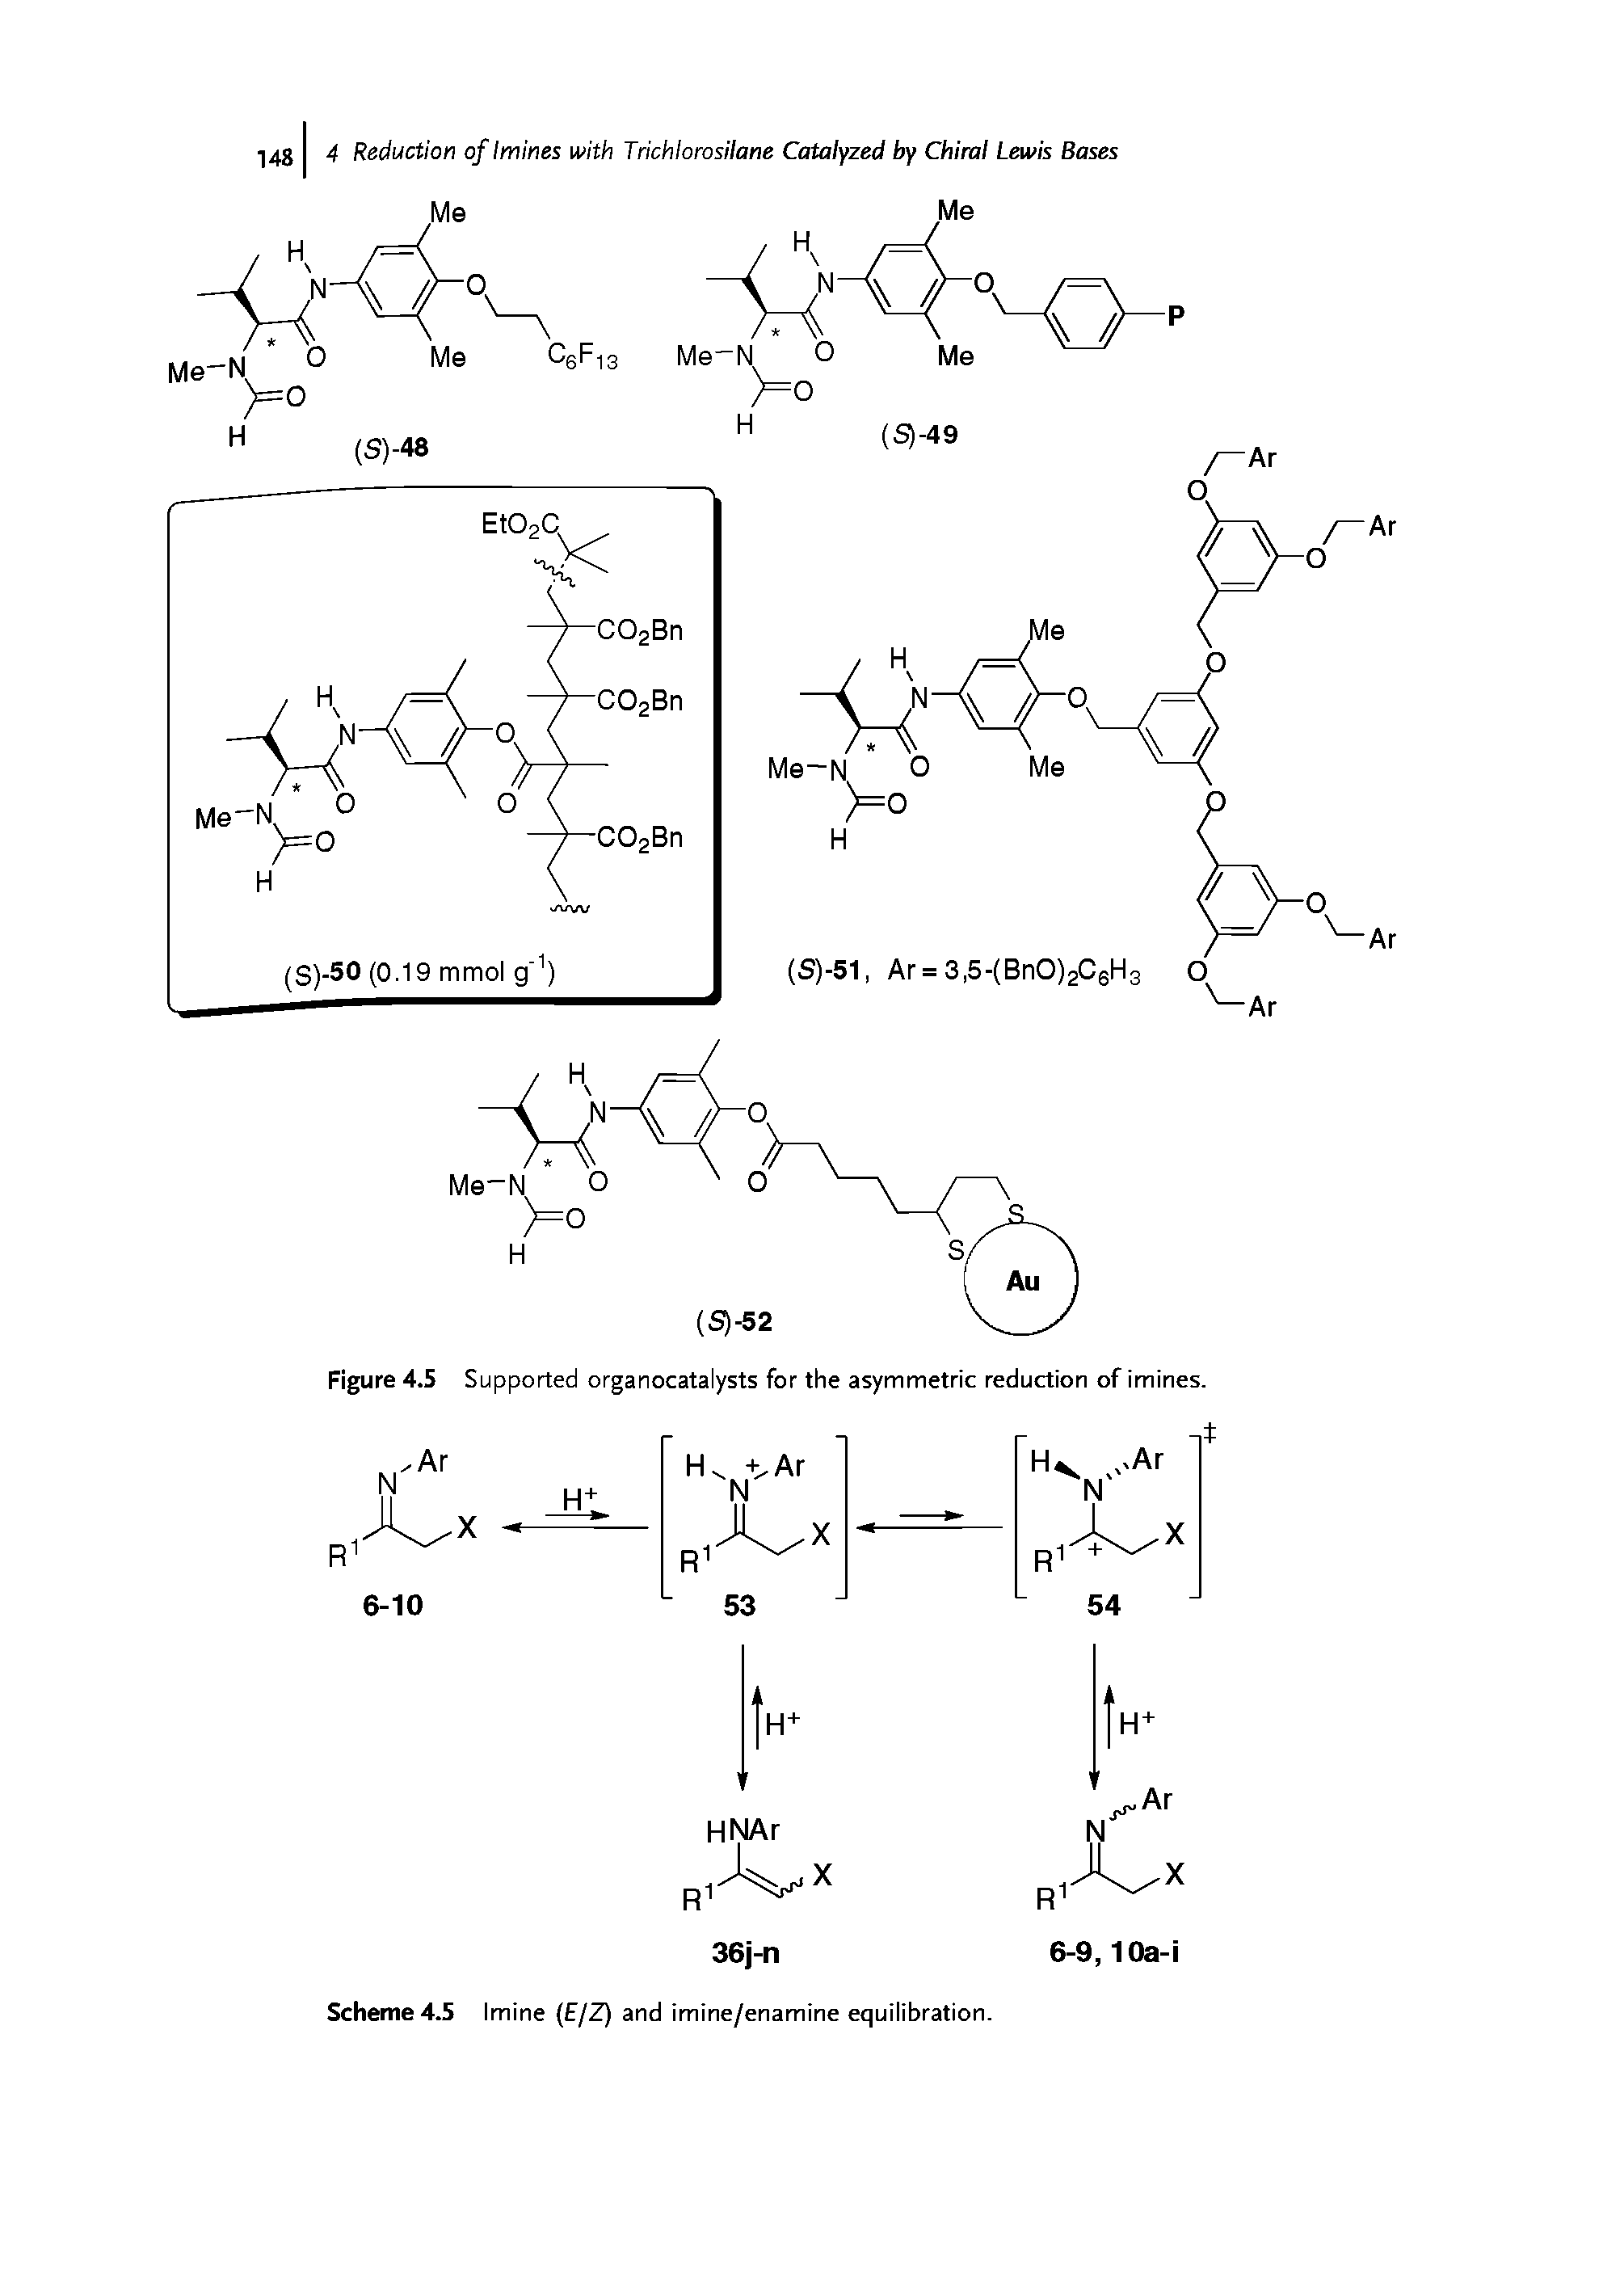 Figure 4.5 Supported organocatalysts for the asymmetric reduction of imines.